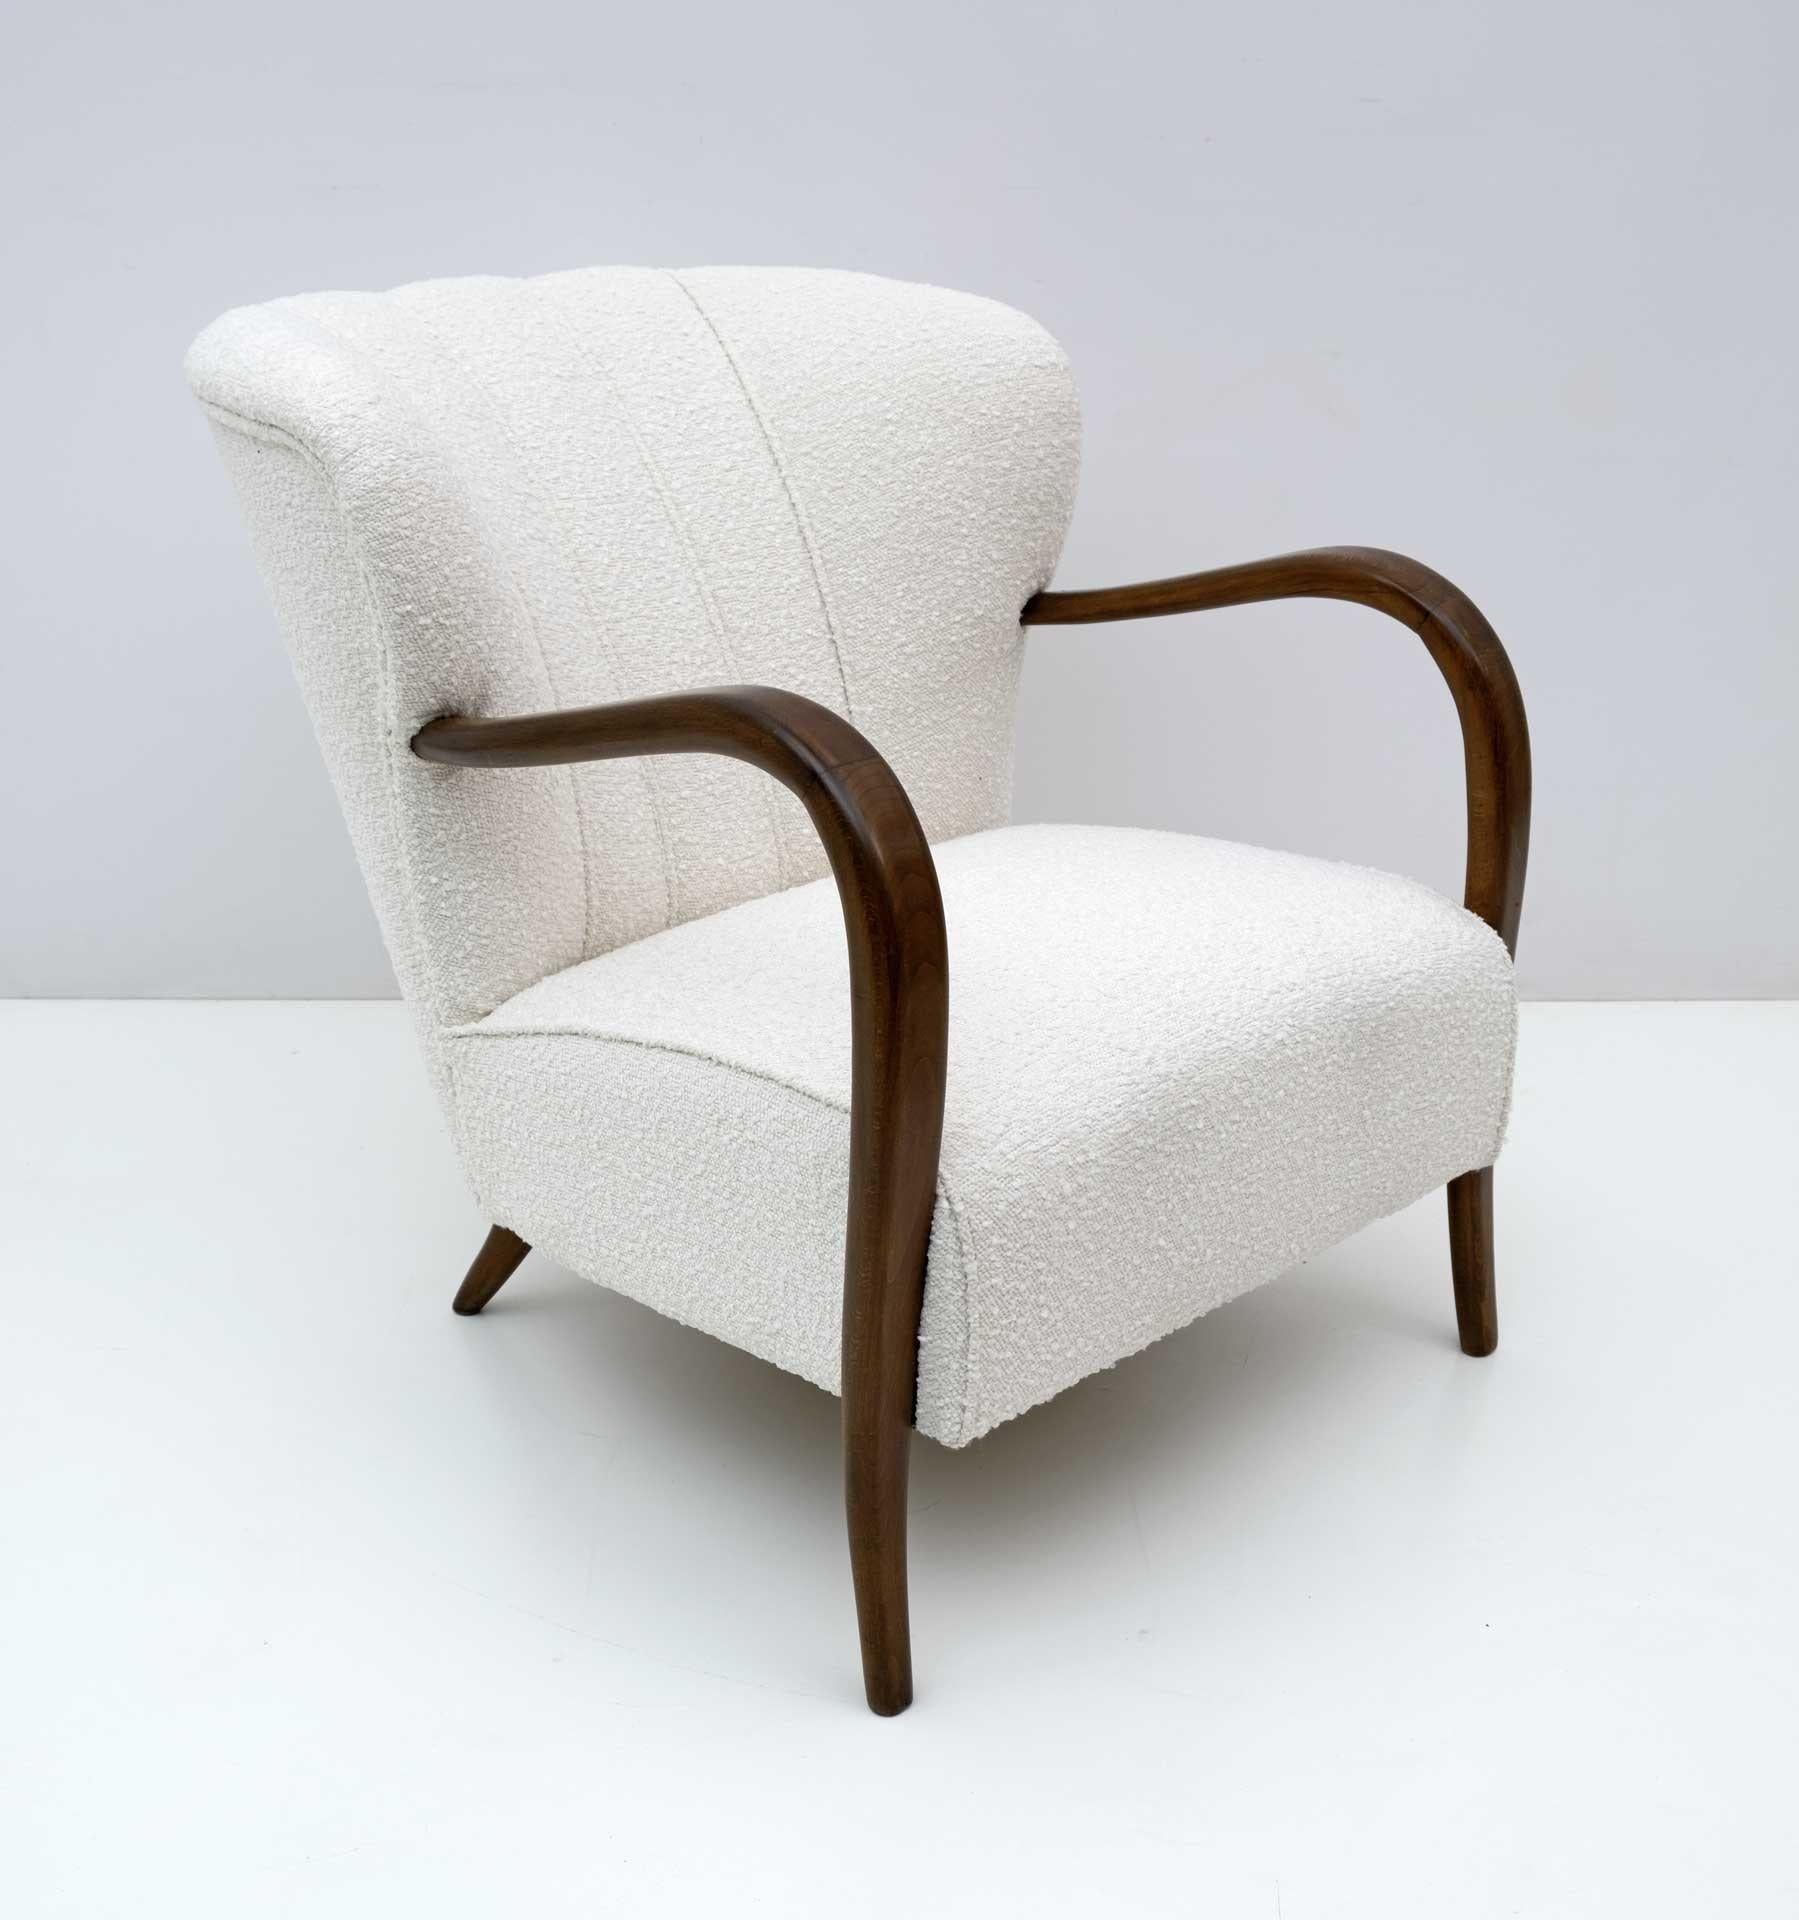 Comfortable armchair from the Art Deco period, with rounded curves of great design, completely restored and upholstered in light ivory bouclé fabric. This lounge chair would fit perfectly in a living room as well as in the corner of a bedroom or